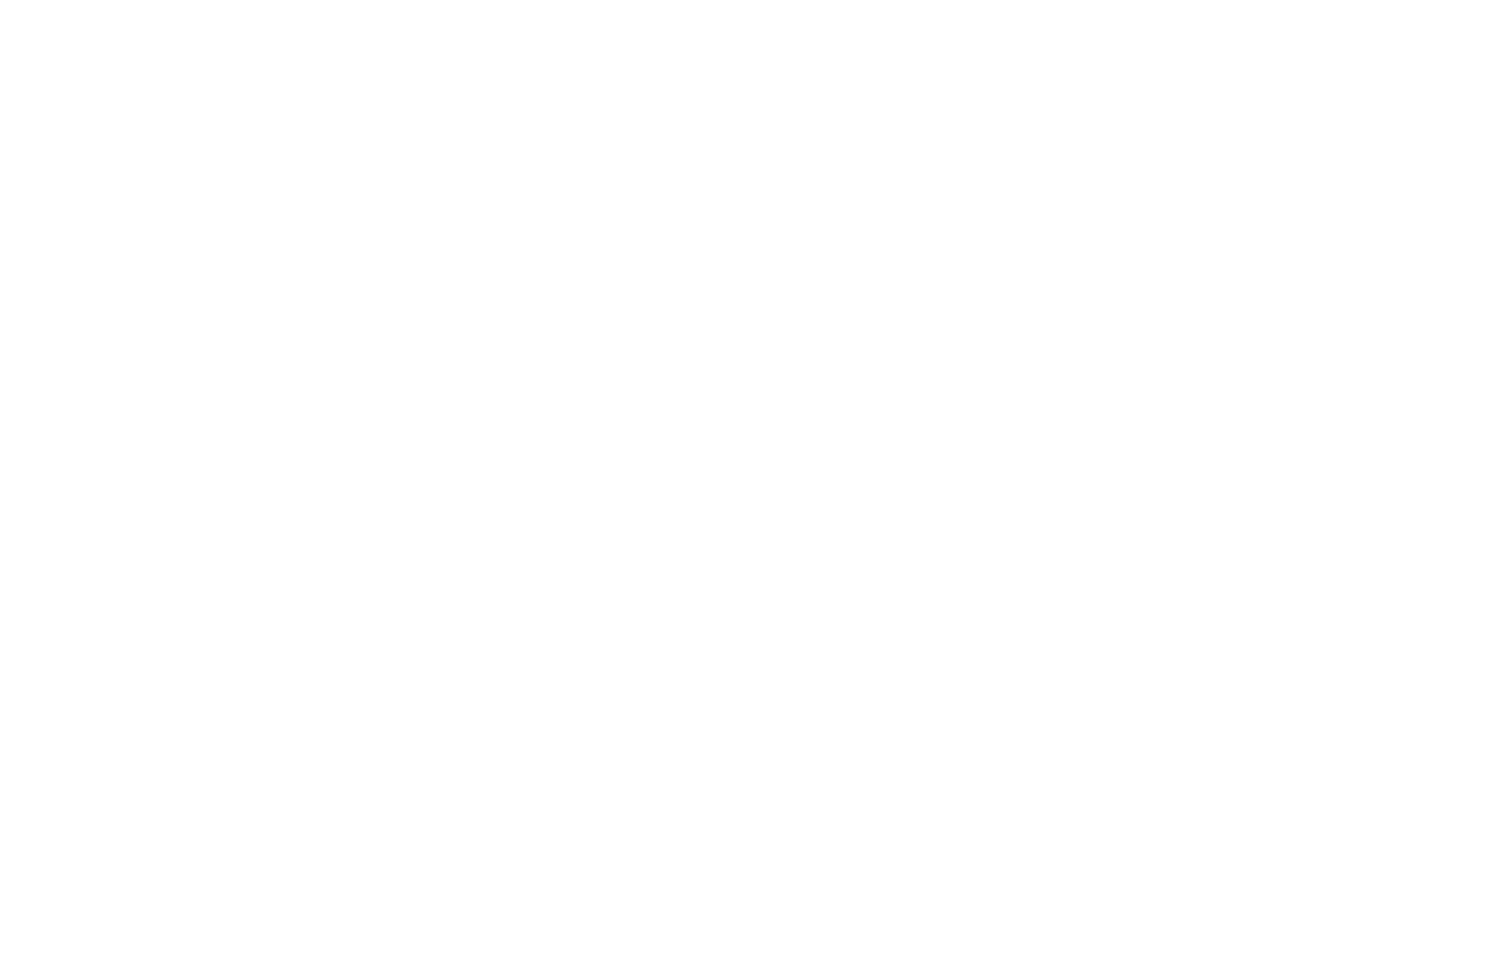 Allo blends decal White